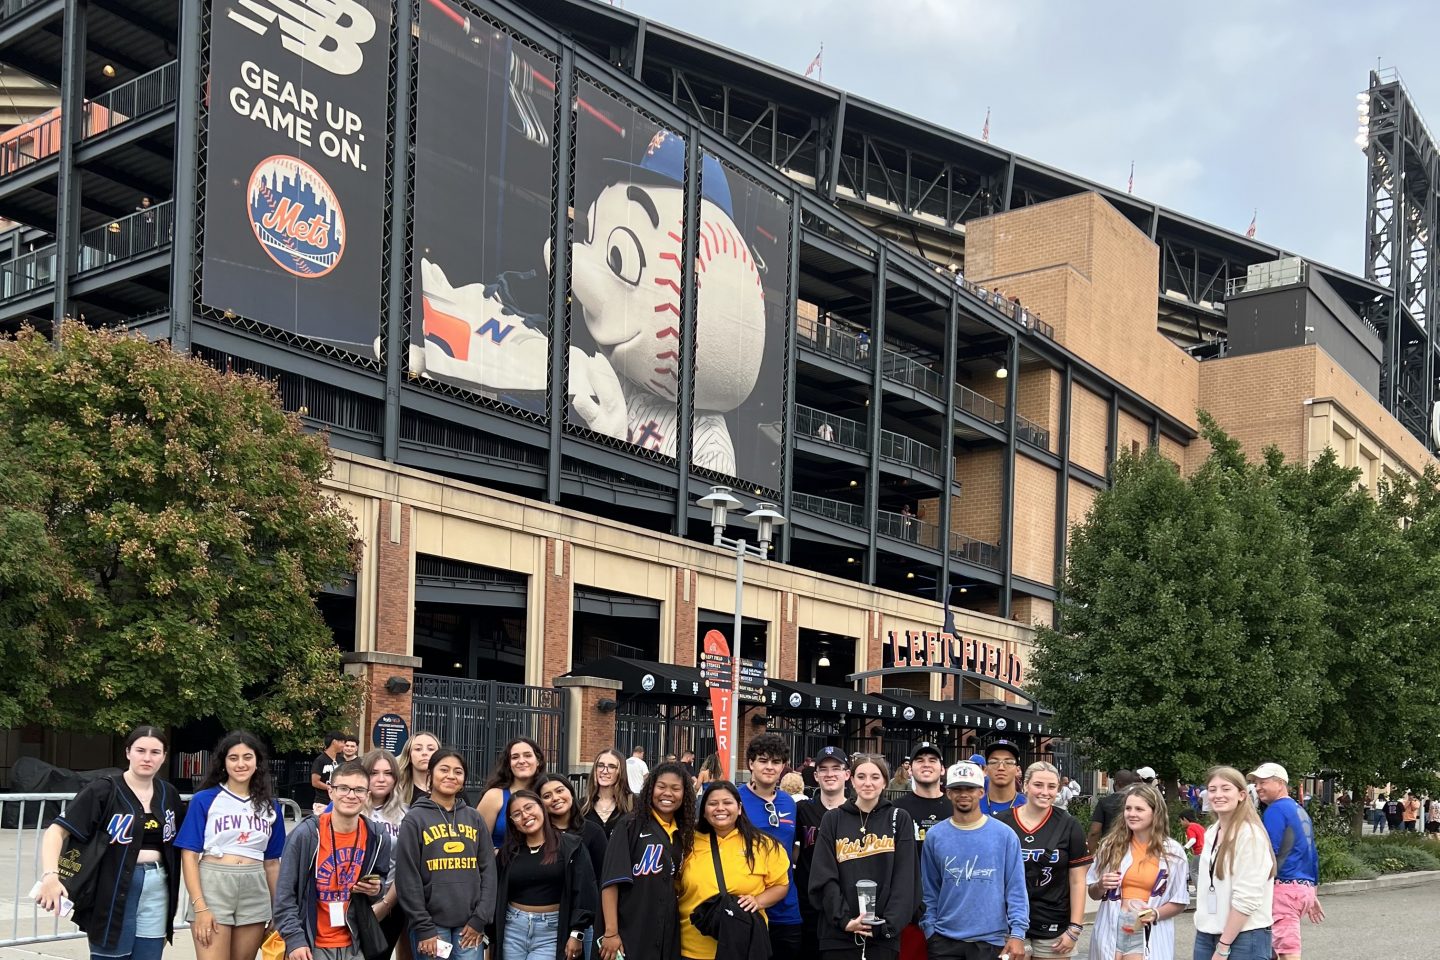 A group of about 24 young adults is standing in front of the entrance to a large building identified as a baseball stadium due to visible signage and associated elements. The group appears to be diverse, with individuals wearing casual clothing, some in sports attire like baseball jerseys of different teams, and others in Adelphi University-branded sweatshirts.